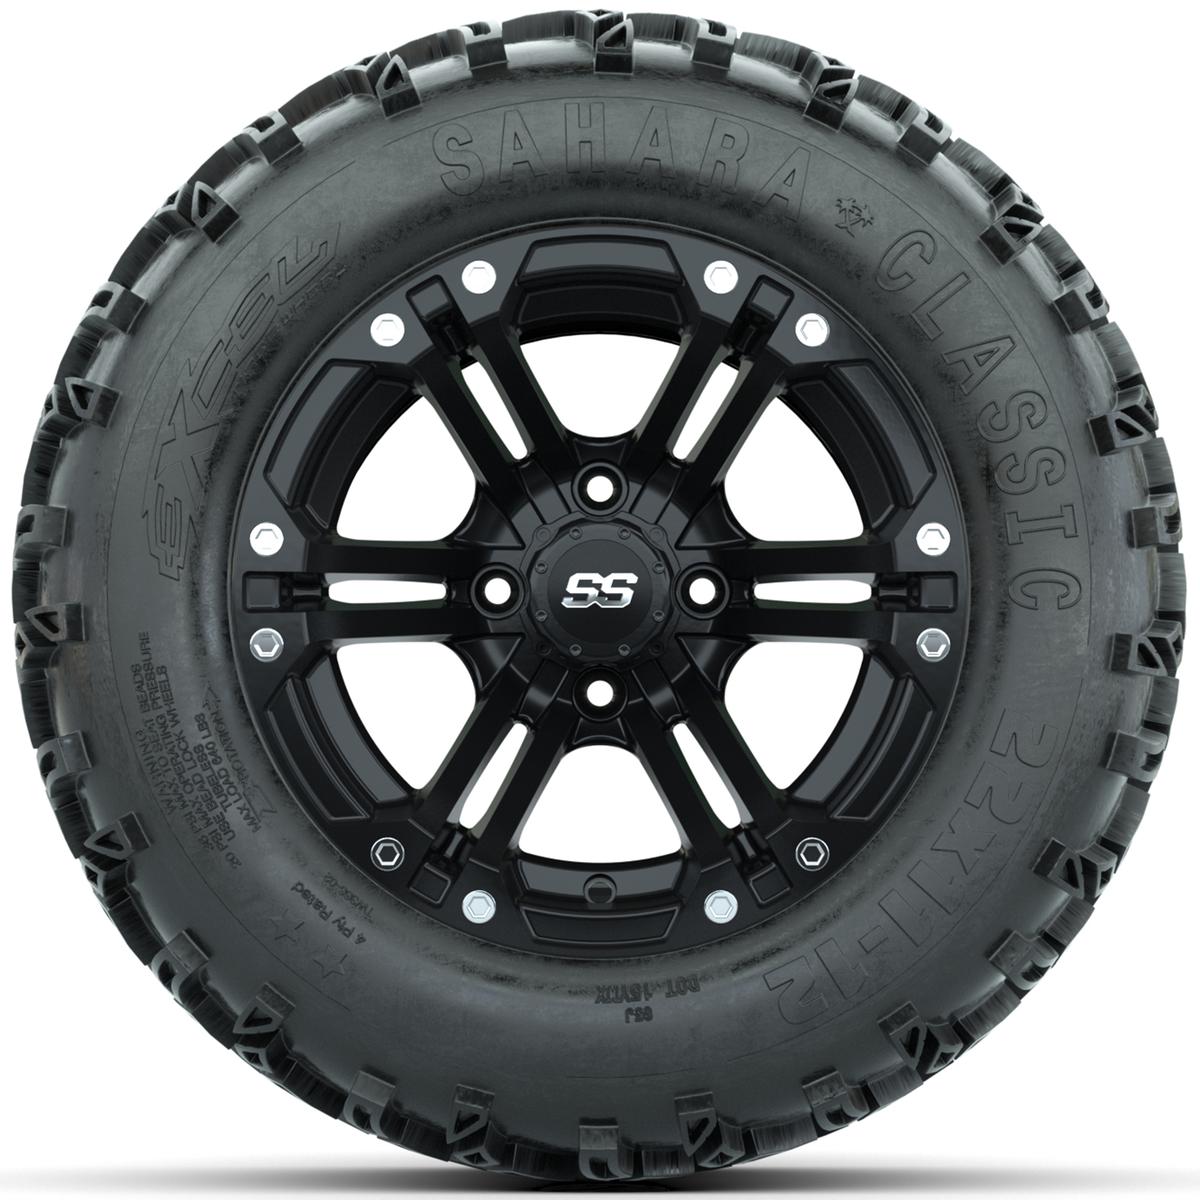 Set of (4) 12 in GTW Specter Wheels with 22x11-12 Sahara Classic All-Terrain Tires